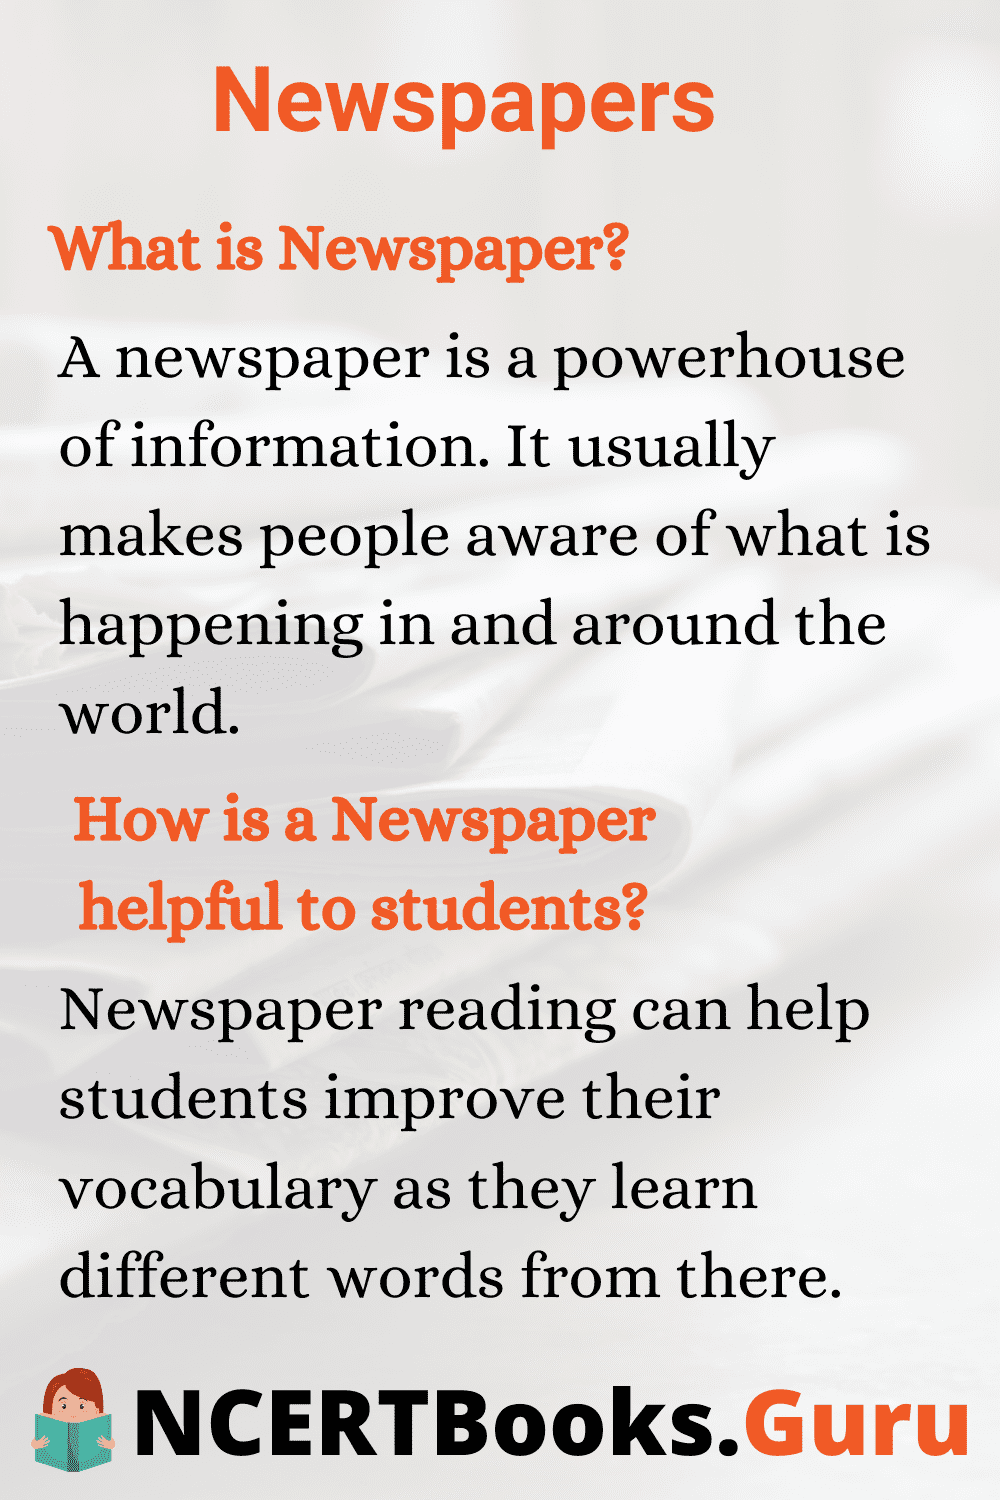 the importance of reading newspaper essay